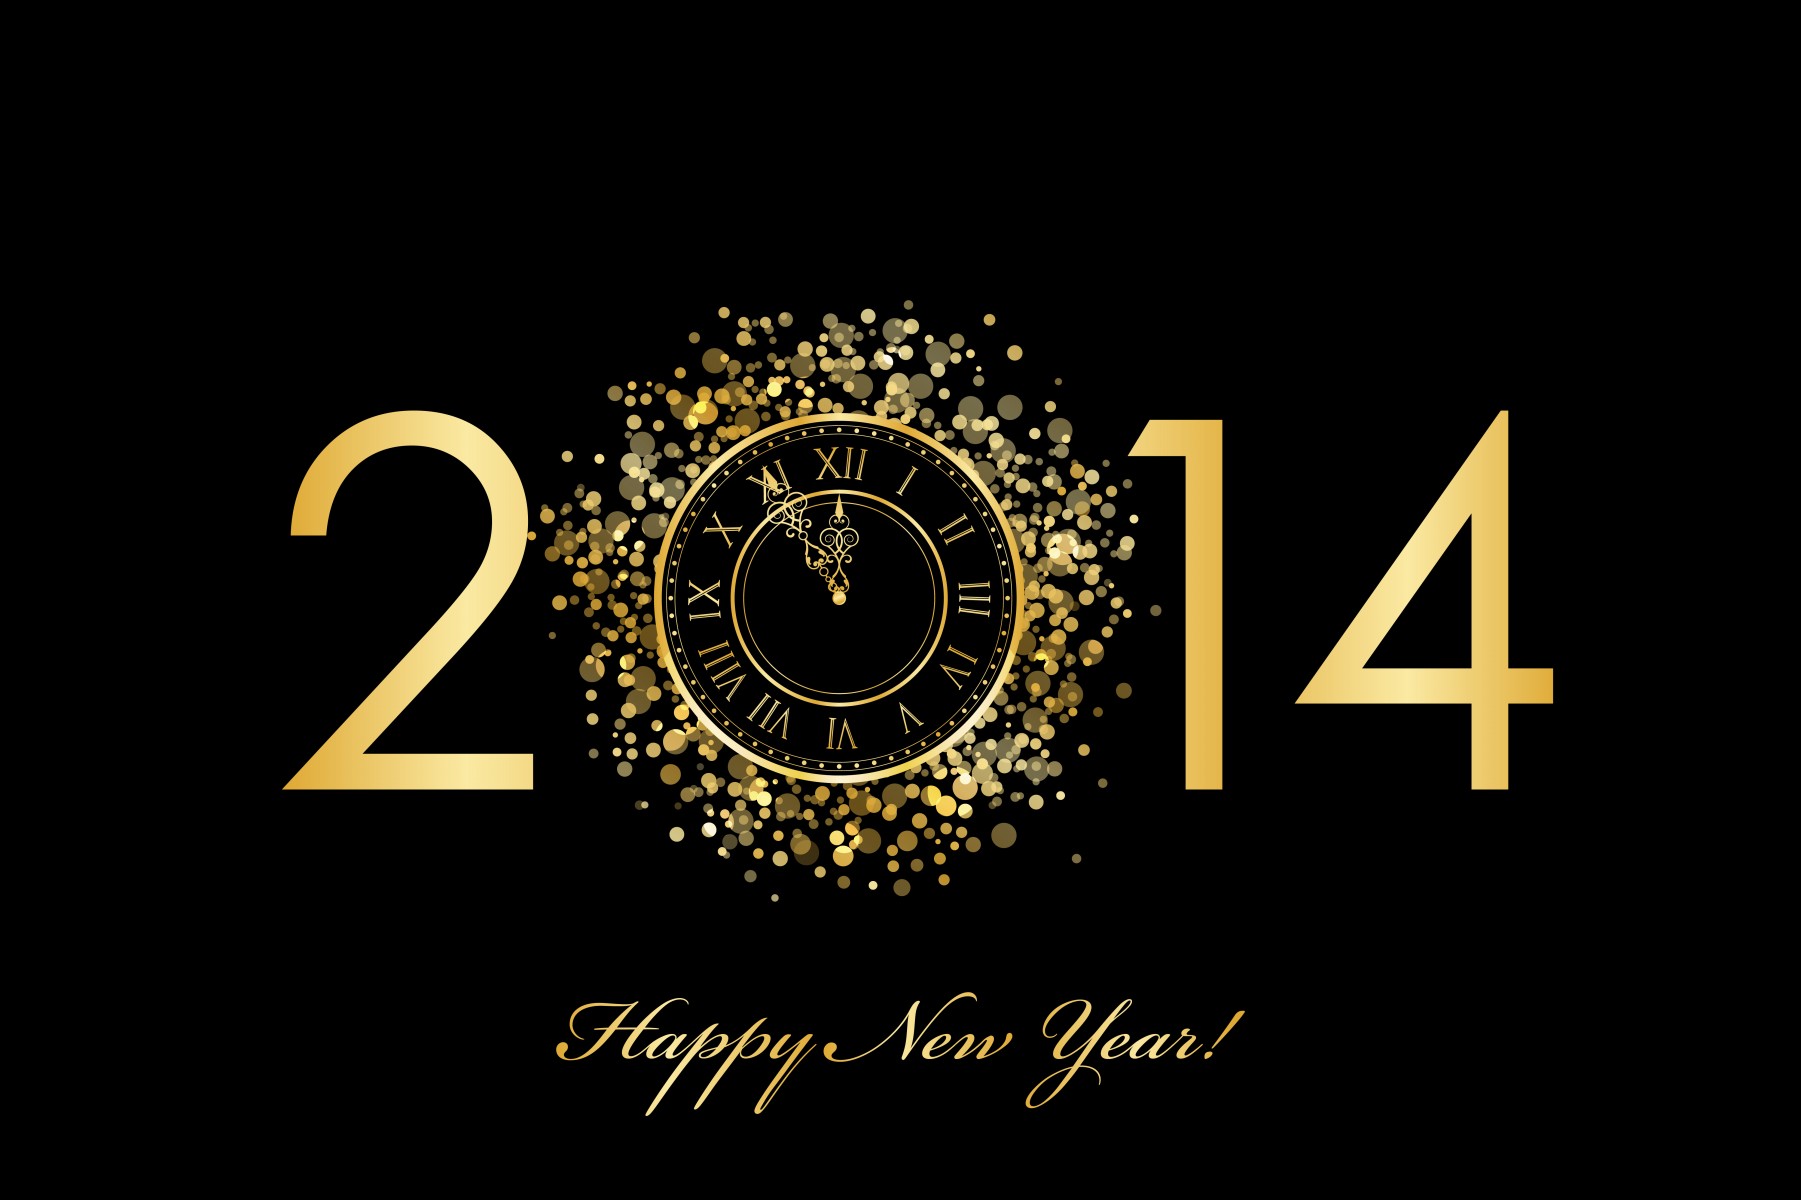 New years eve wallpaper 2014